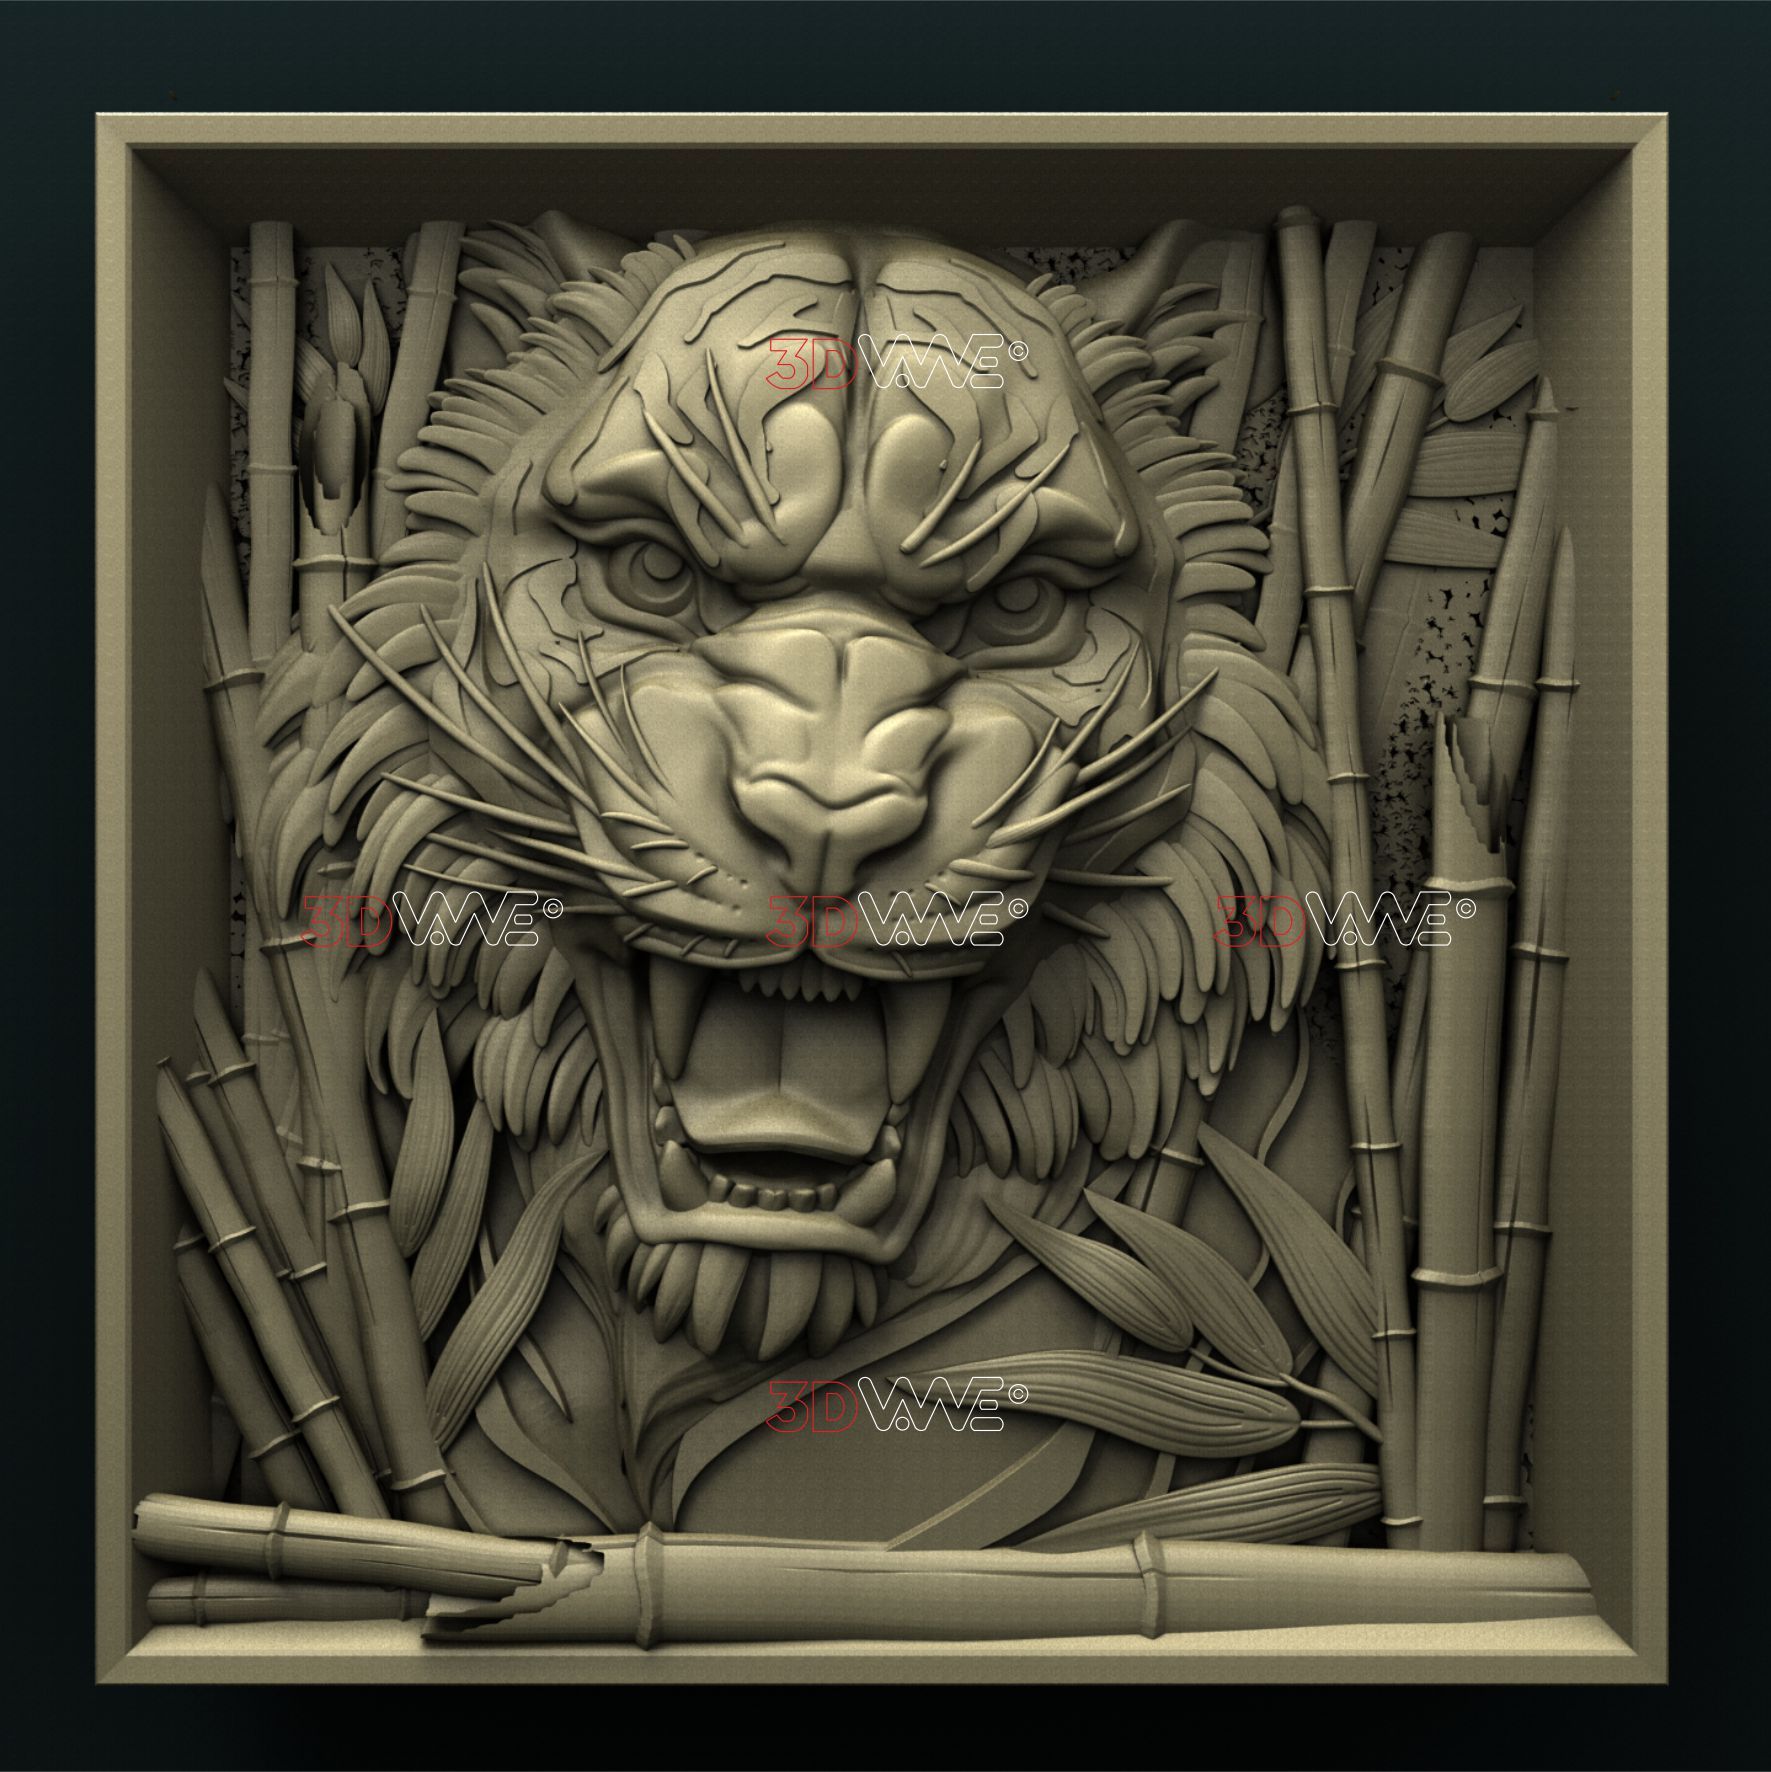 3D file Tiger head STL file 3d model - relief for CNC router or 3D